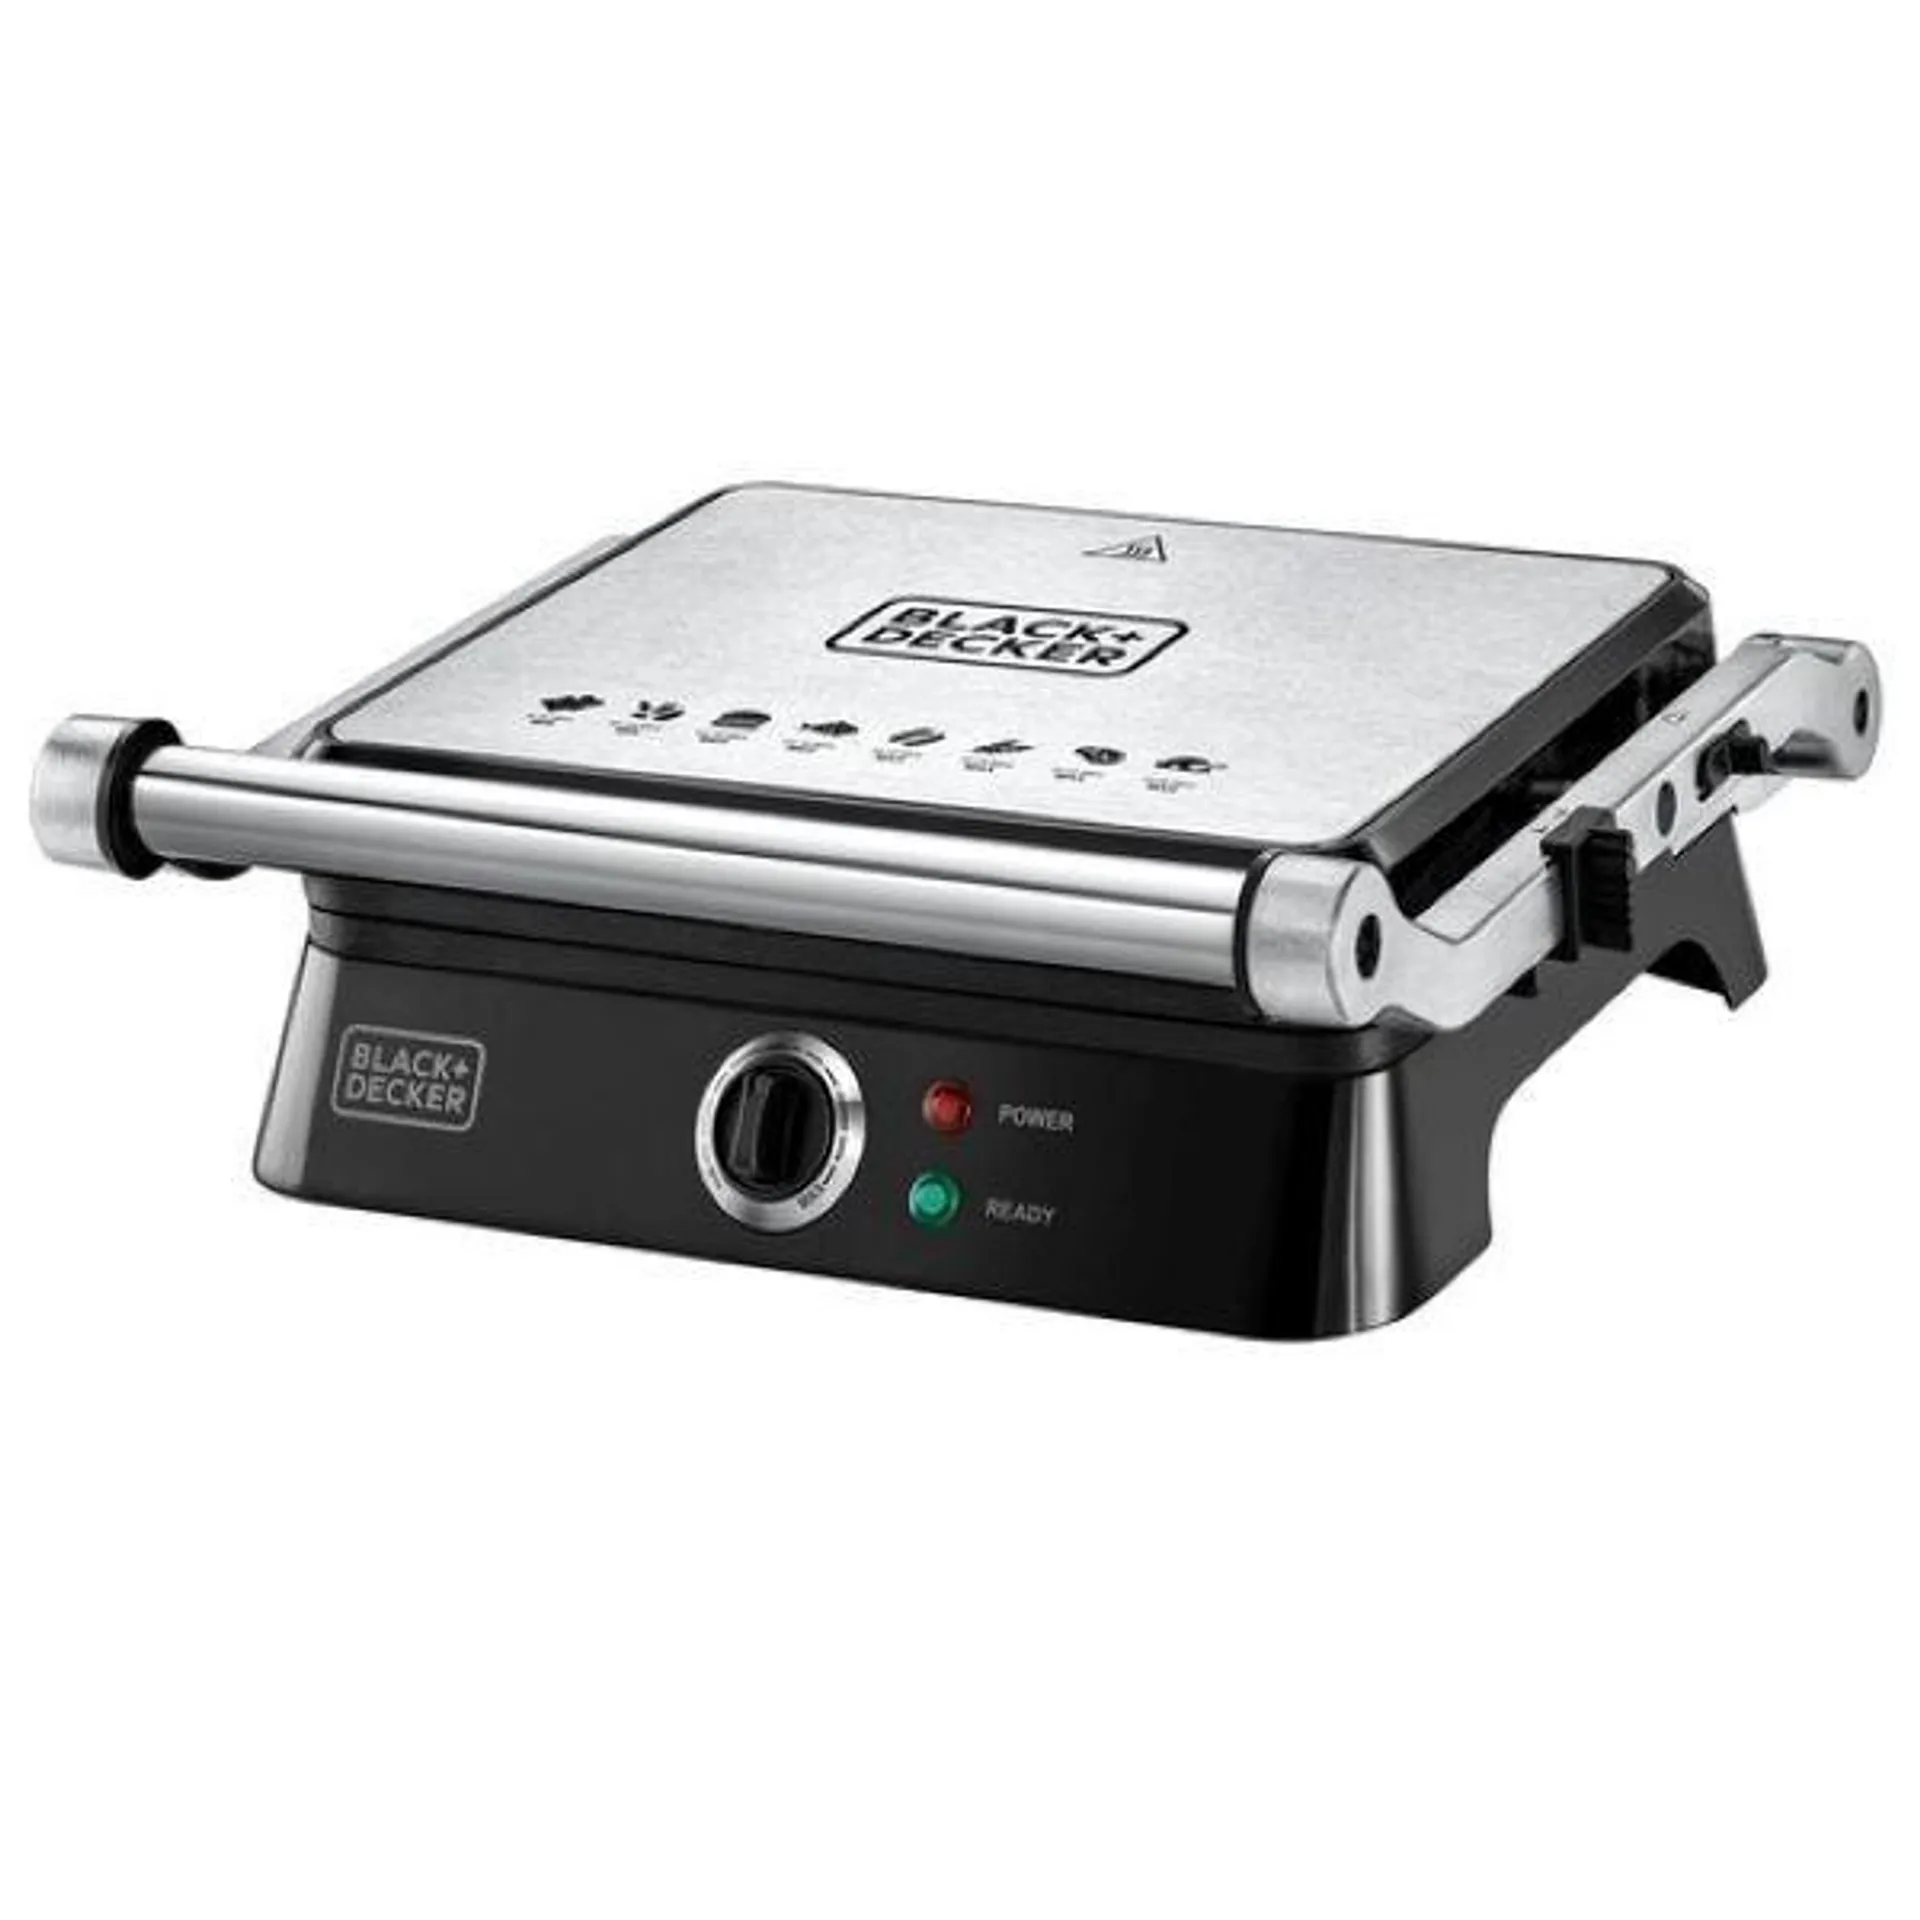 Black & Decker 1400W Electric Contact Grill with Full Flat Grill for Barbecue | CG1400-B5